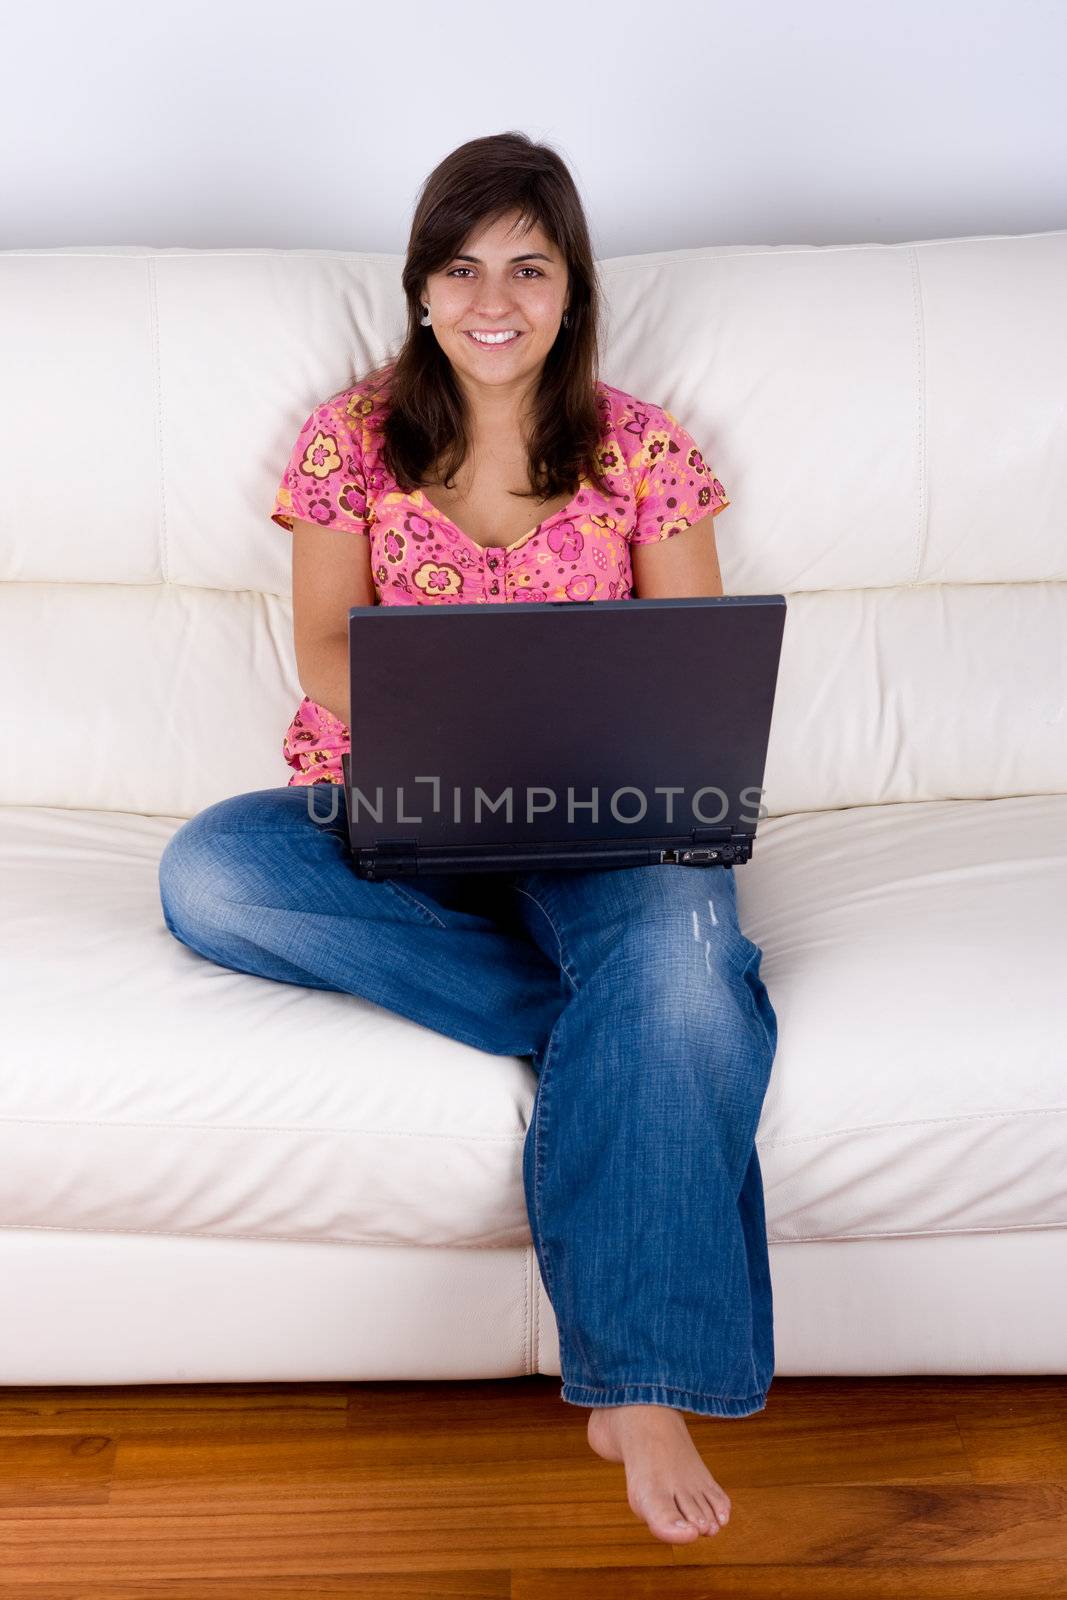 beautiful young woman with laptop computer